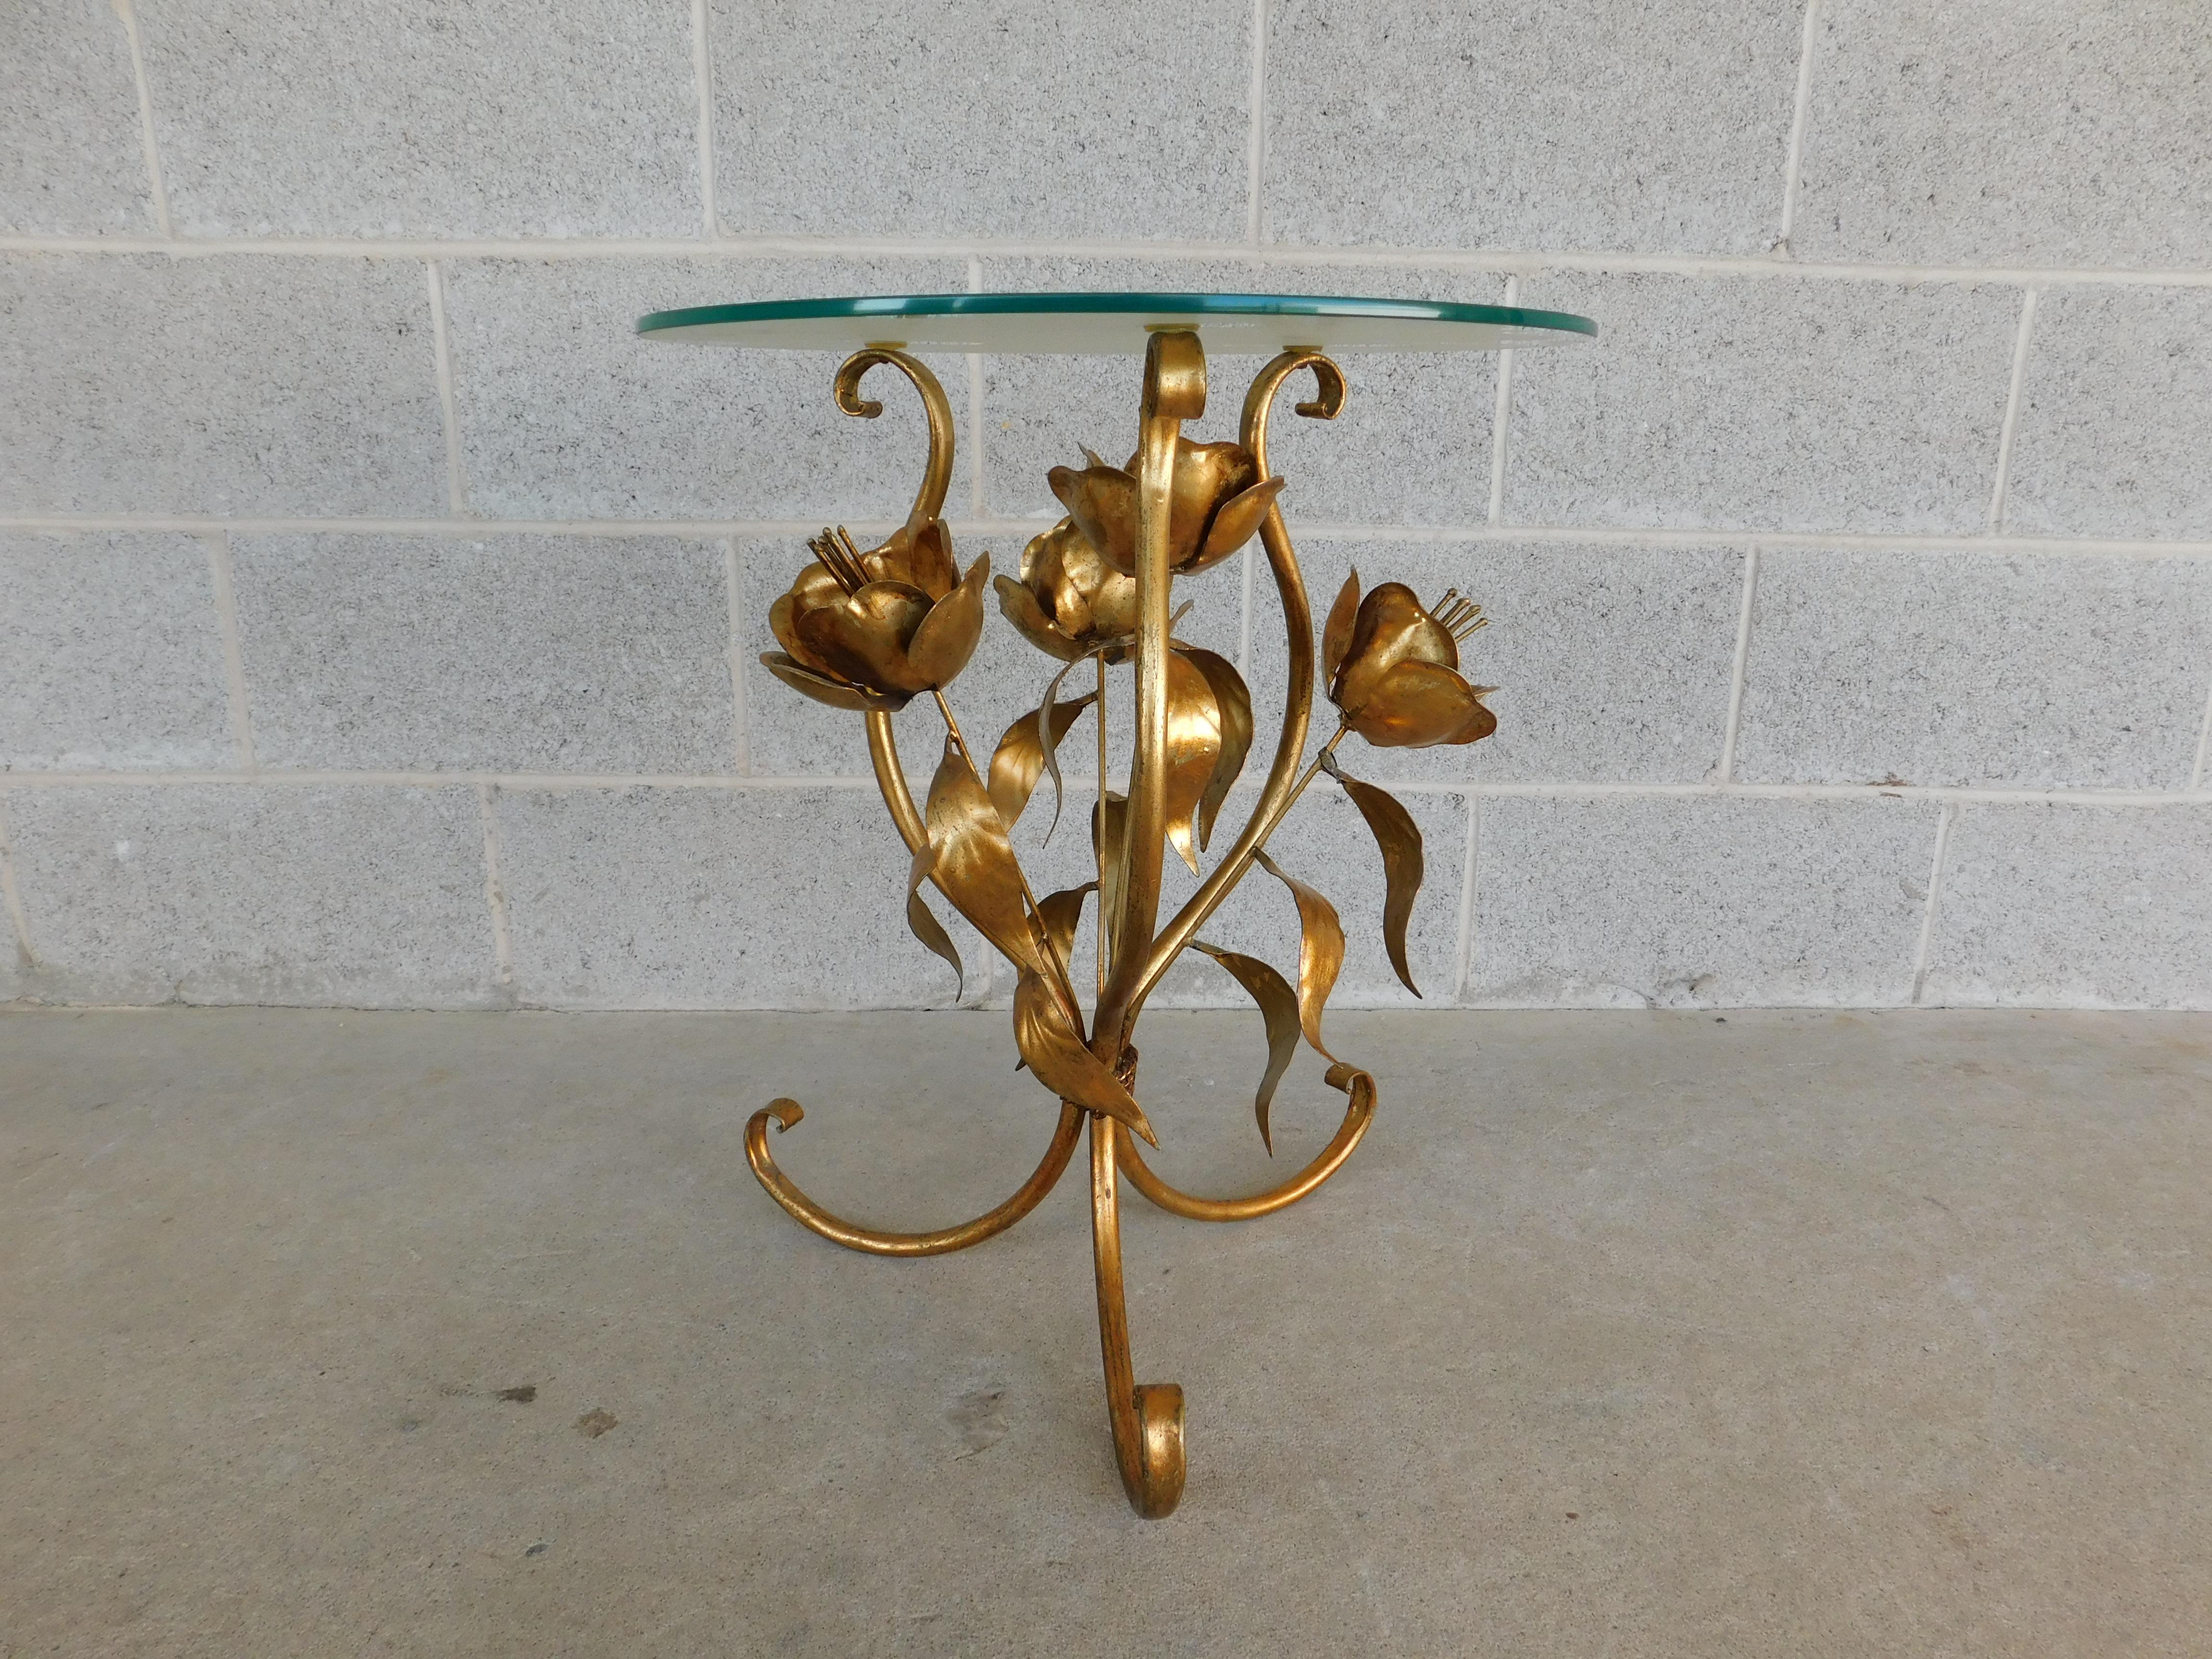 Italian Regency Gilt Gold Metal Base Round Glass Top Accent Table

Made in Italy, Metal with Gilt Gold Overlay Decorative Bouquet of Blooming Tulips with Round Glass Top Resting on Clear Cushioned Pads

Very Good Original Condition, Circa